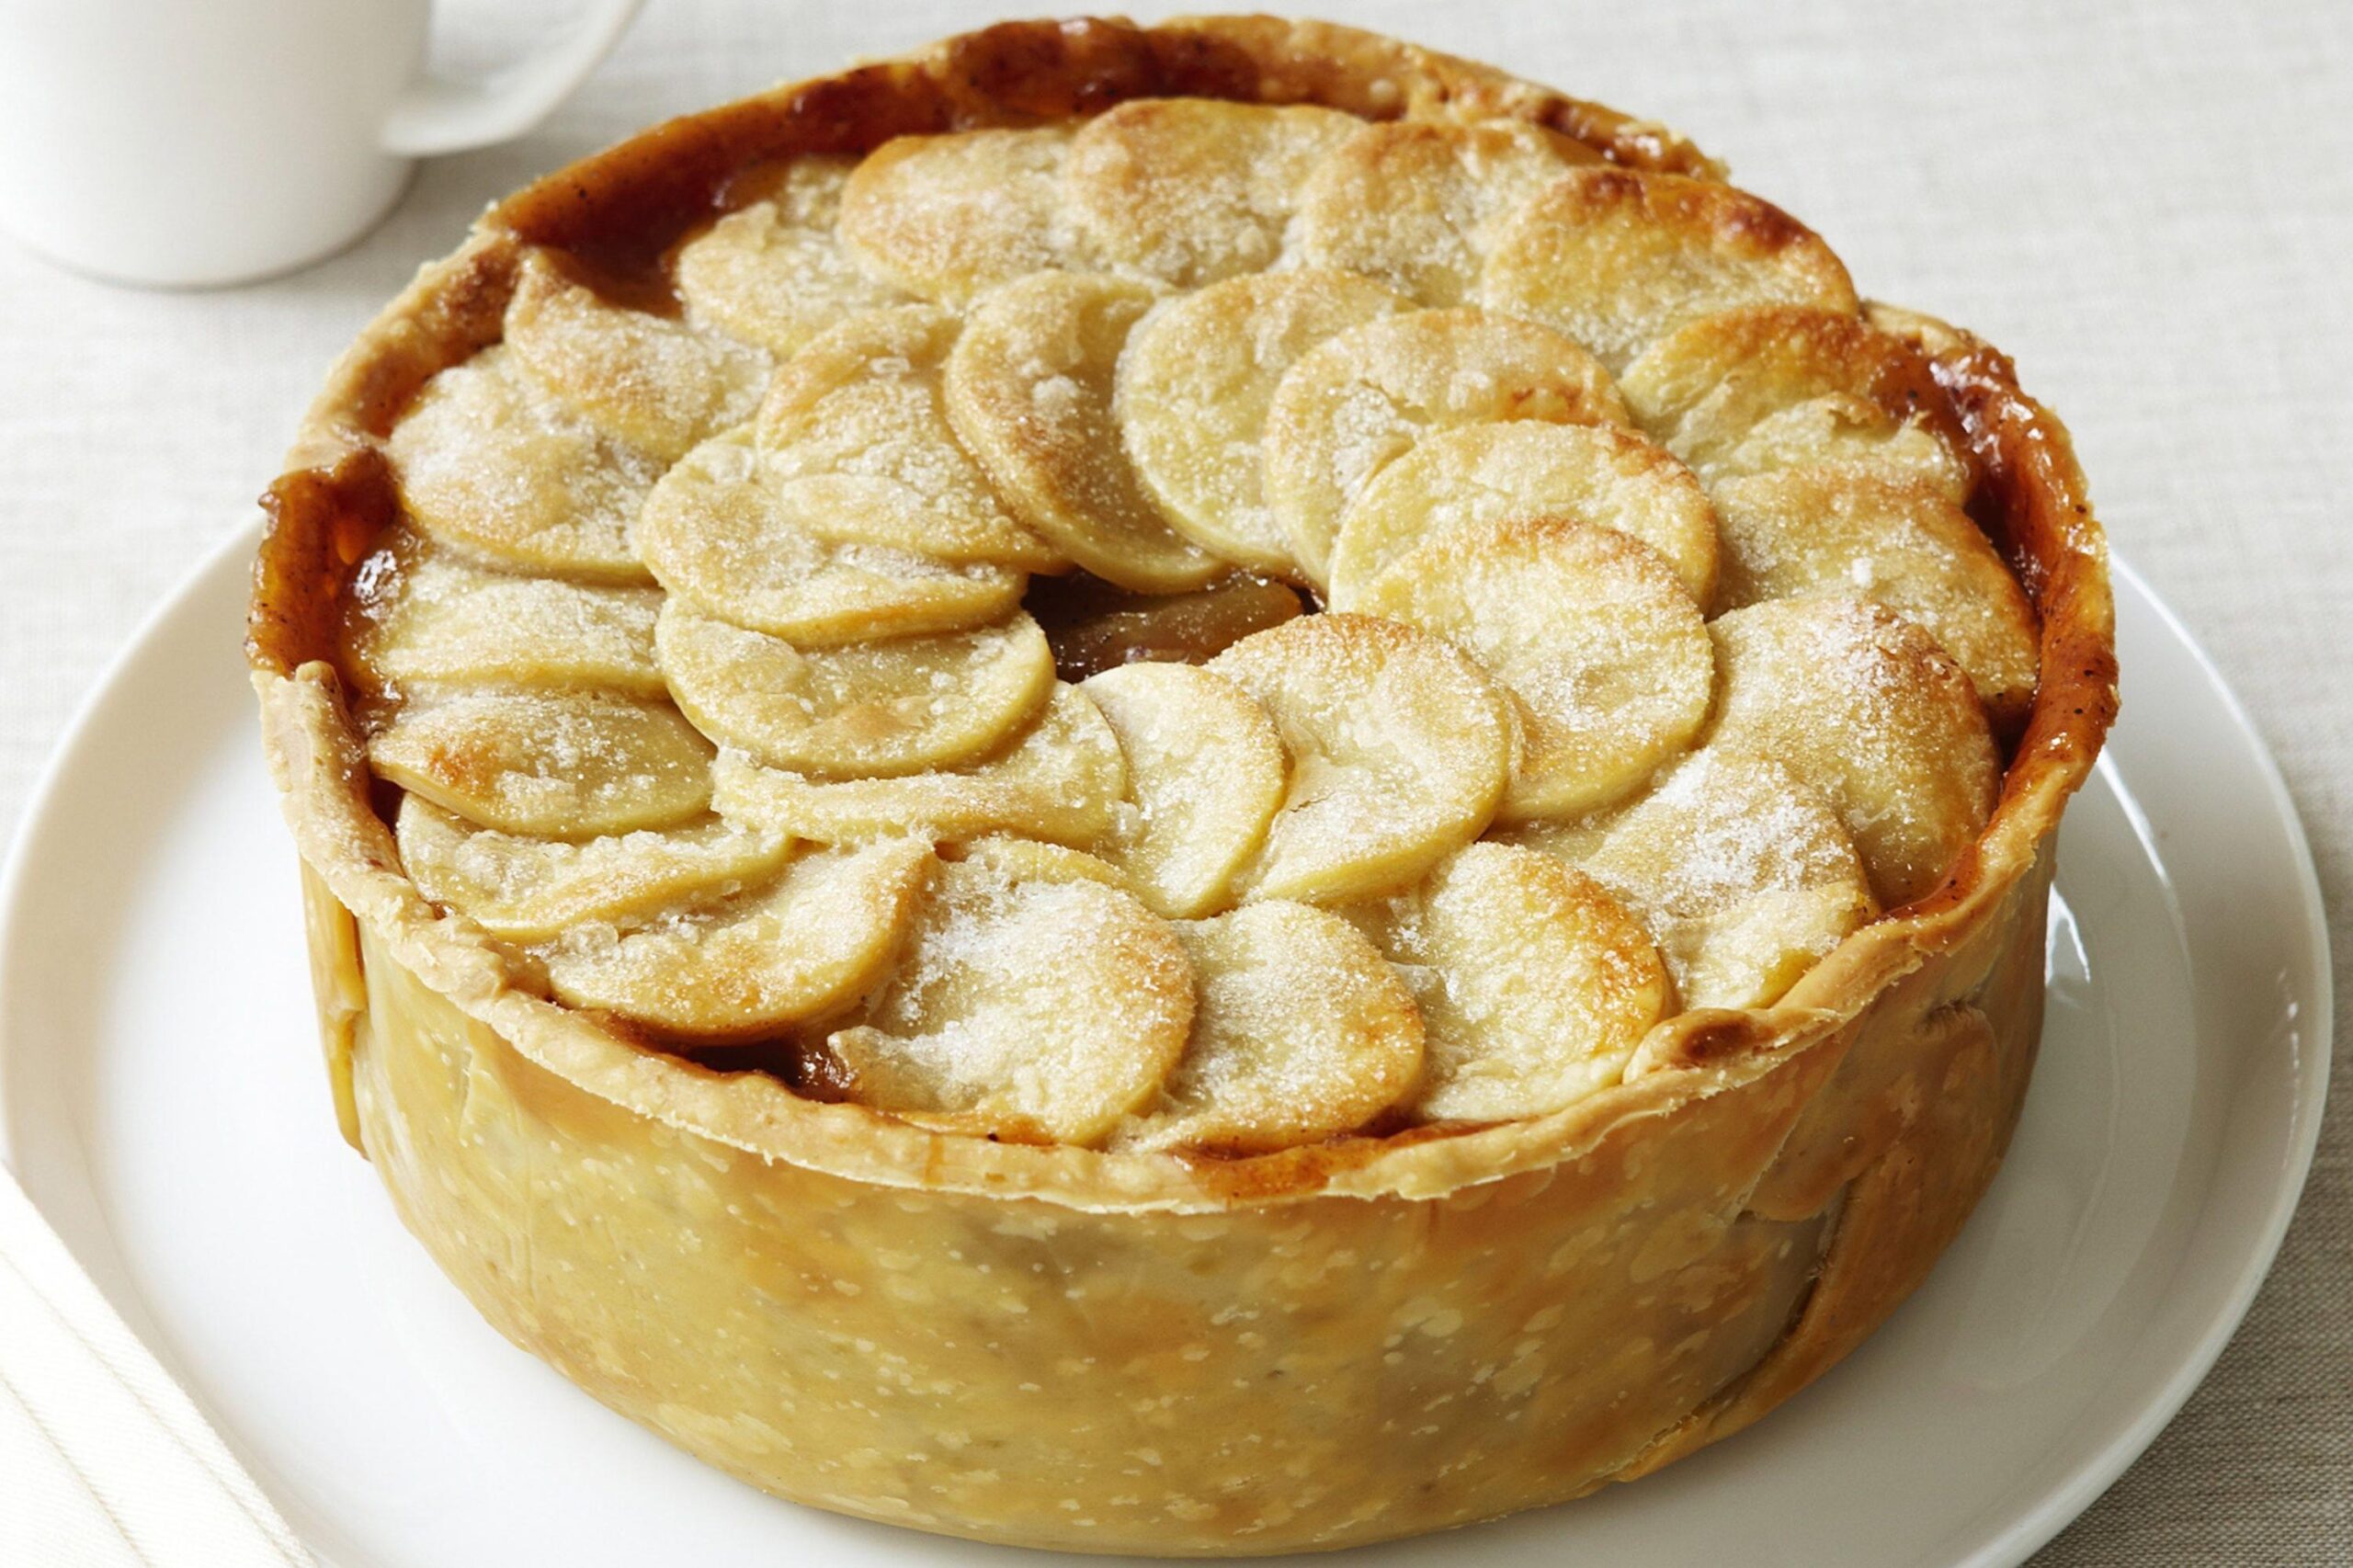  Warm up your kitchen and your heart with this delicious homemade pie